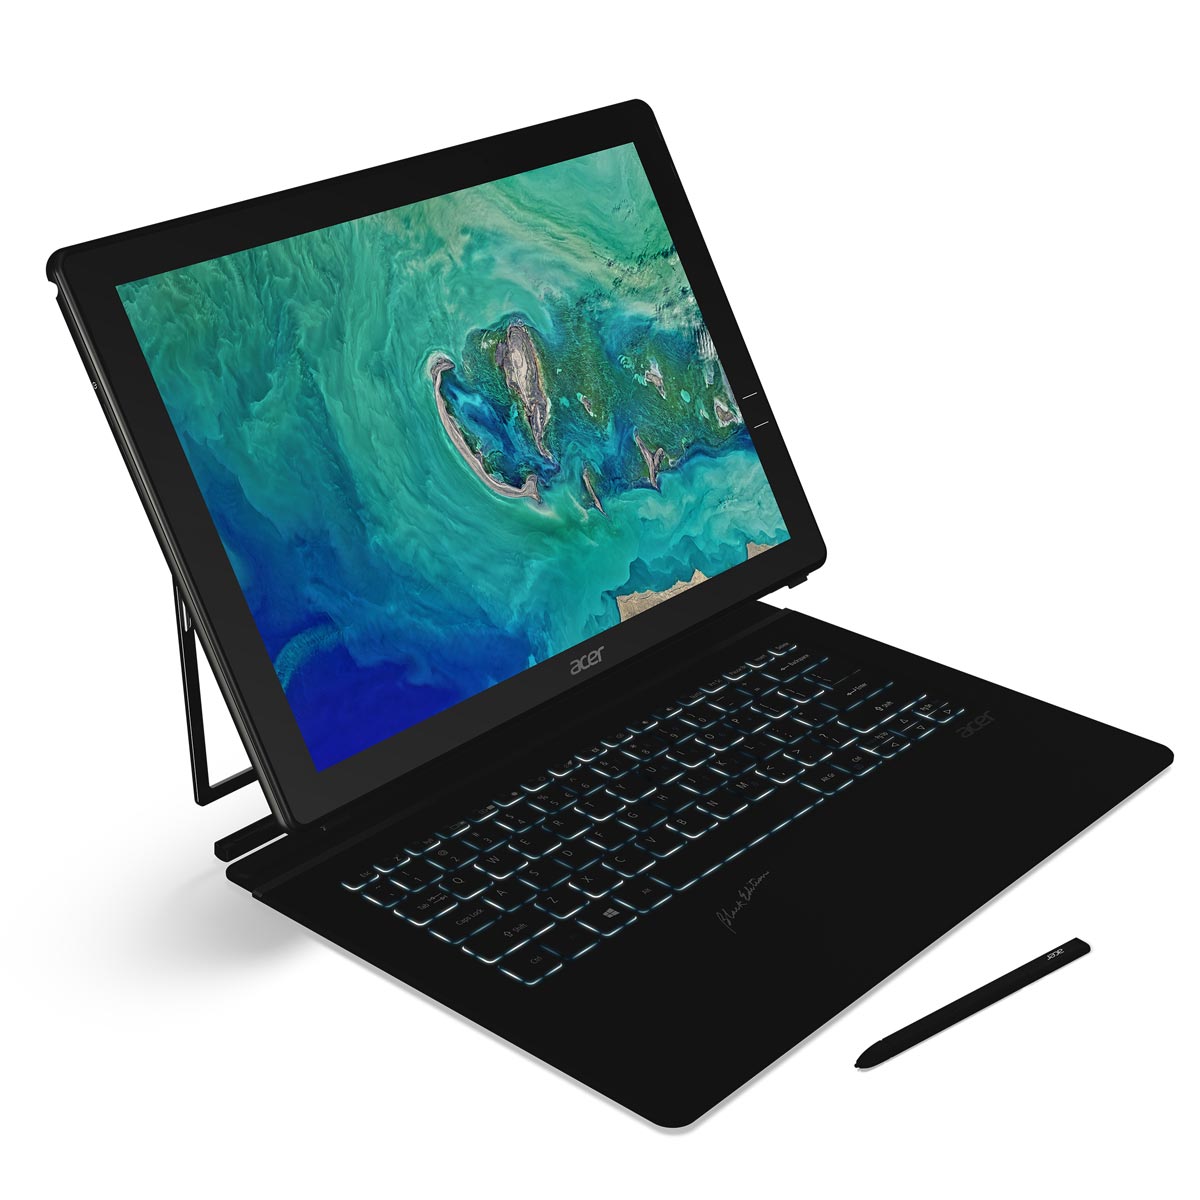 Acer-Switch-7-Black-Edition-2-in-1-notebook